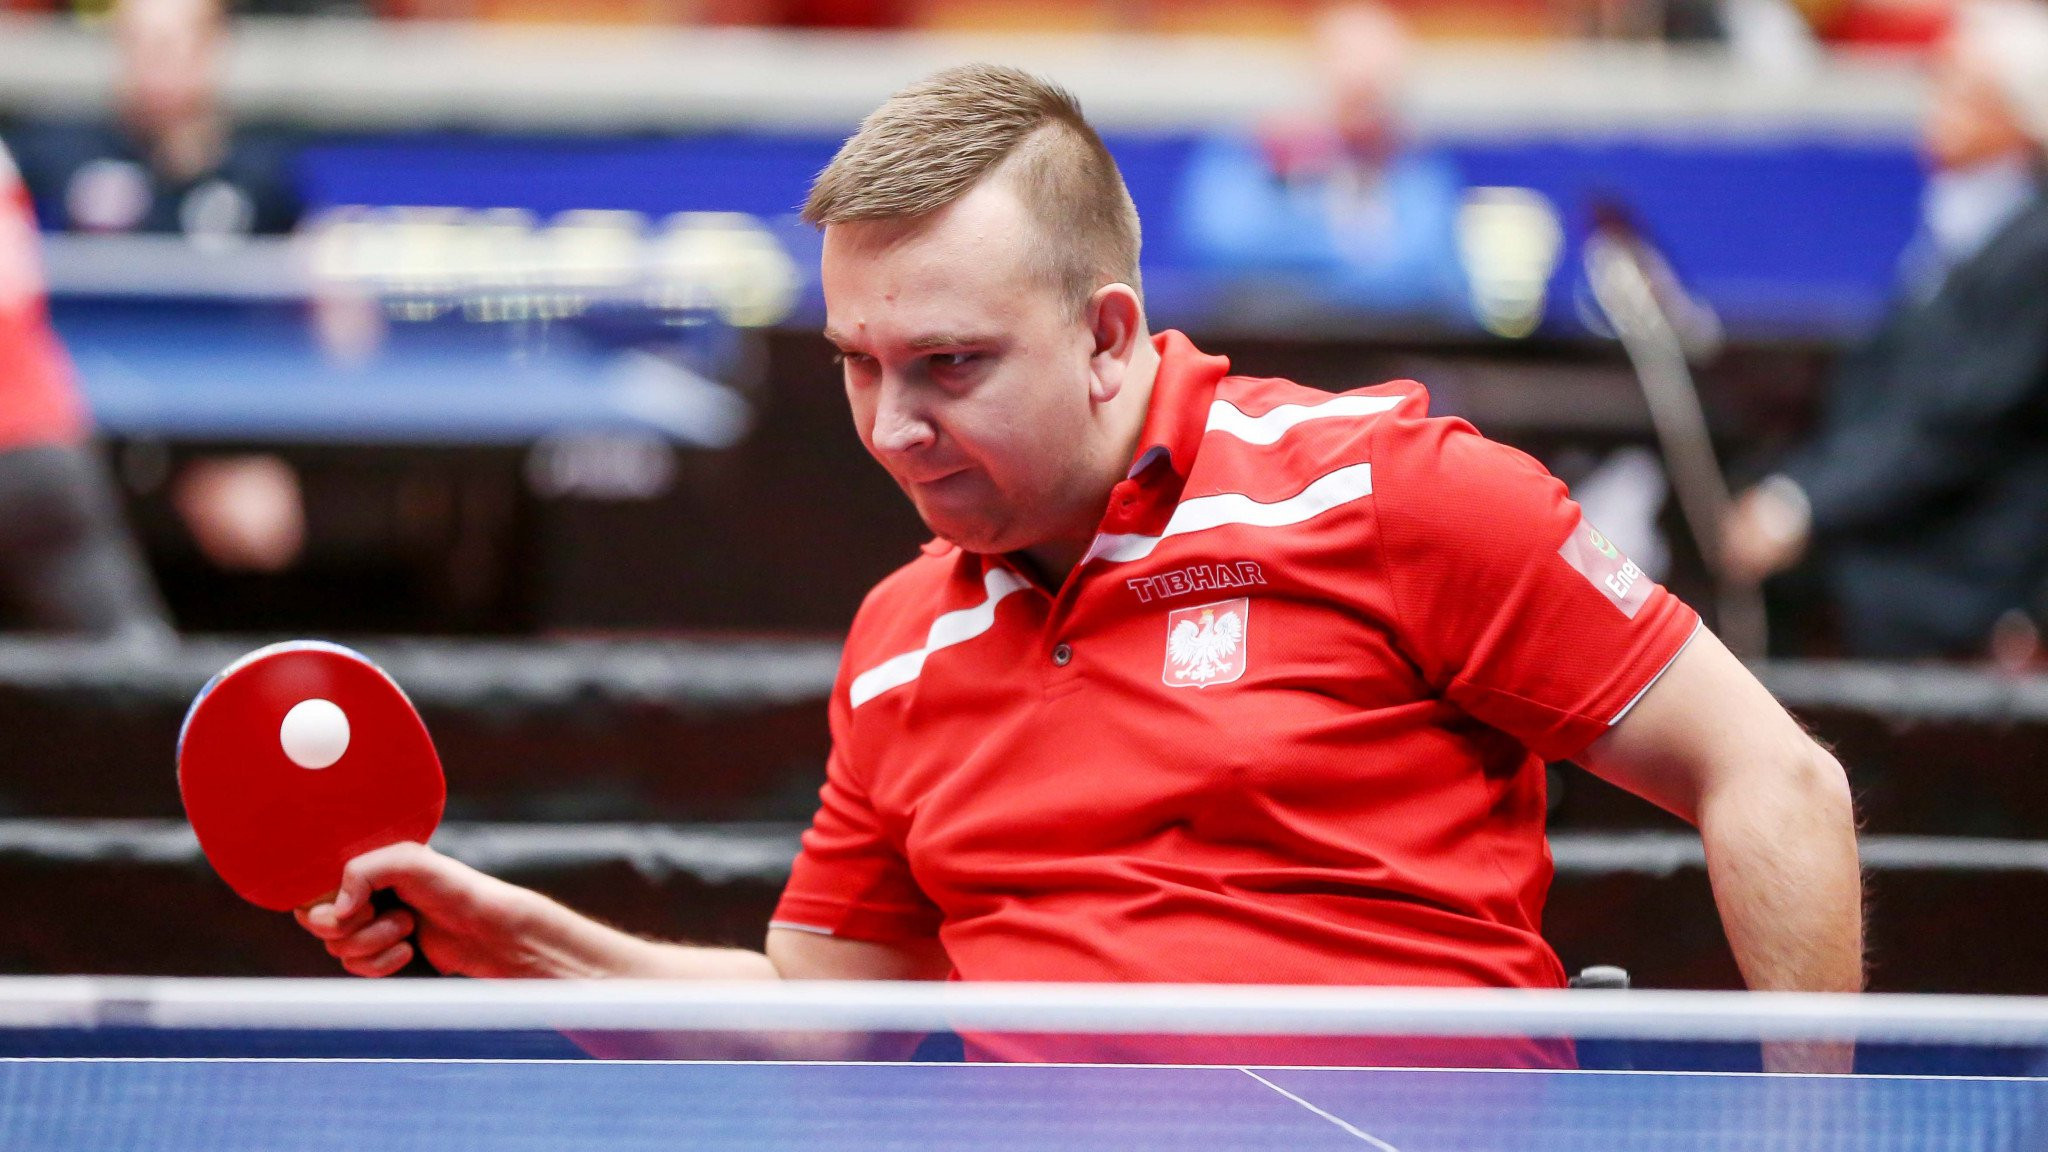 Poland's Rafal Czuper, who with Tomasz Jakimczuk had earlier defeated the Russian second seeds in the class 2 team event at the Para European Table Tennis Championships in Sweden, went out at the semi-final stage today ©ITTF